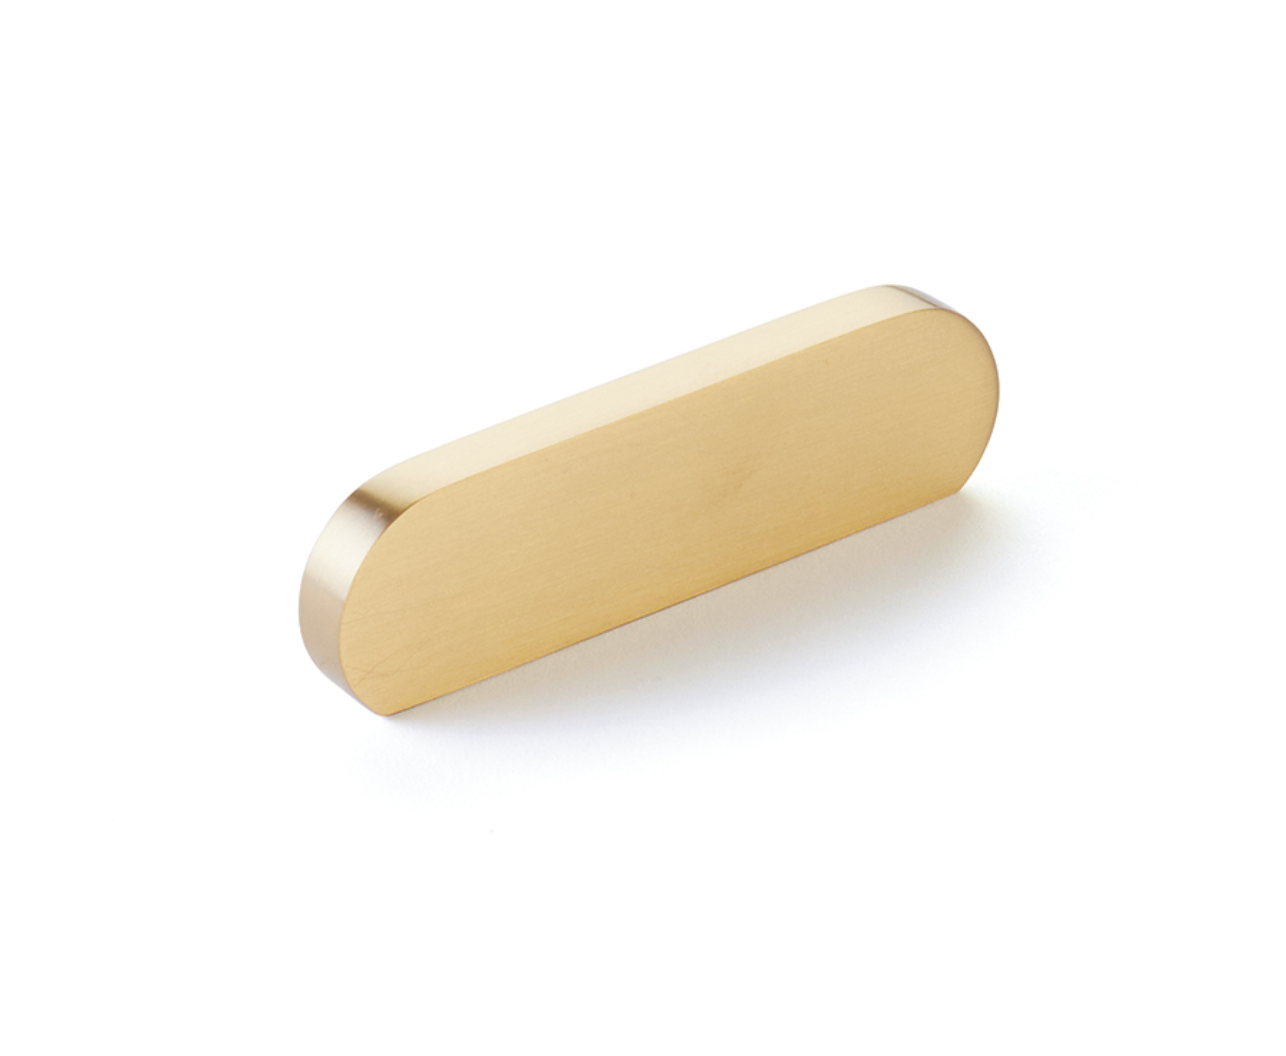 Satin Brass "Bit" Rounded Drawer Pulls and Cabinet Knobs